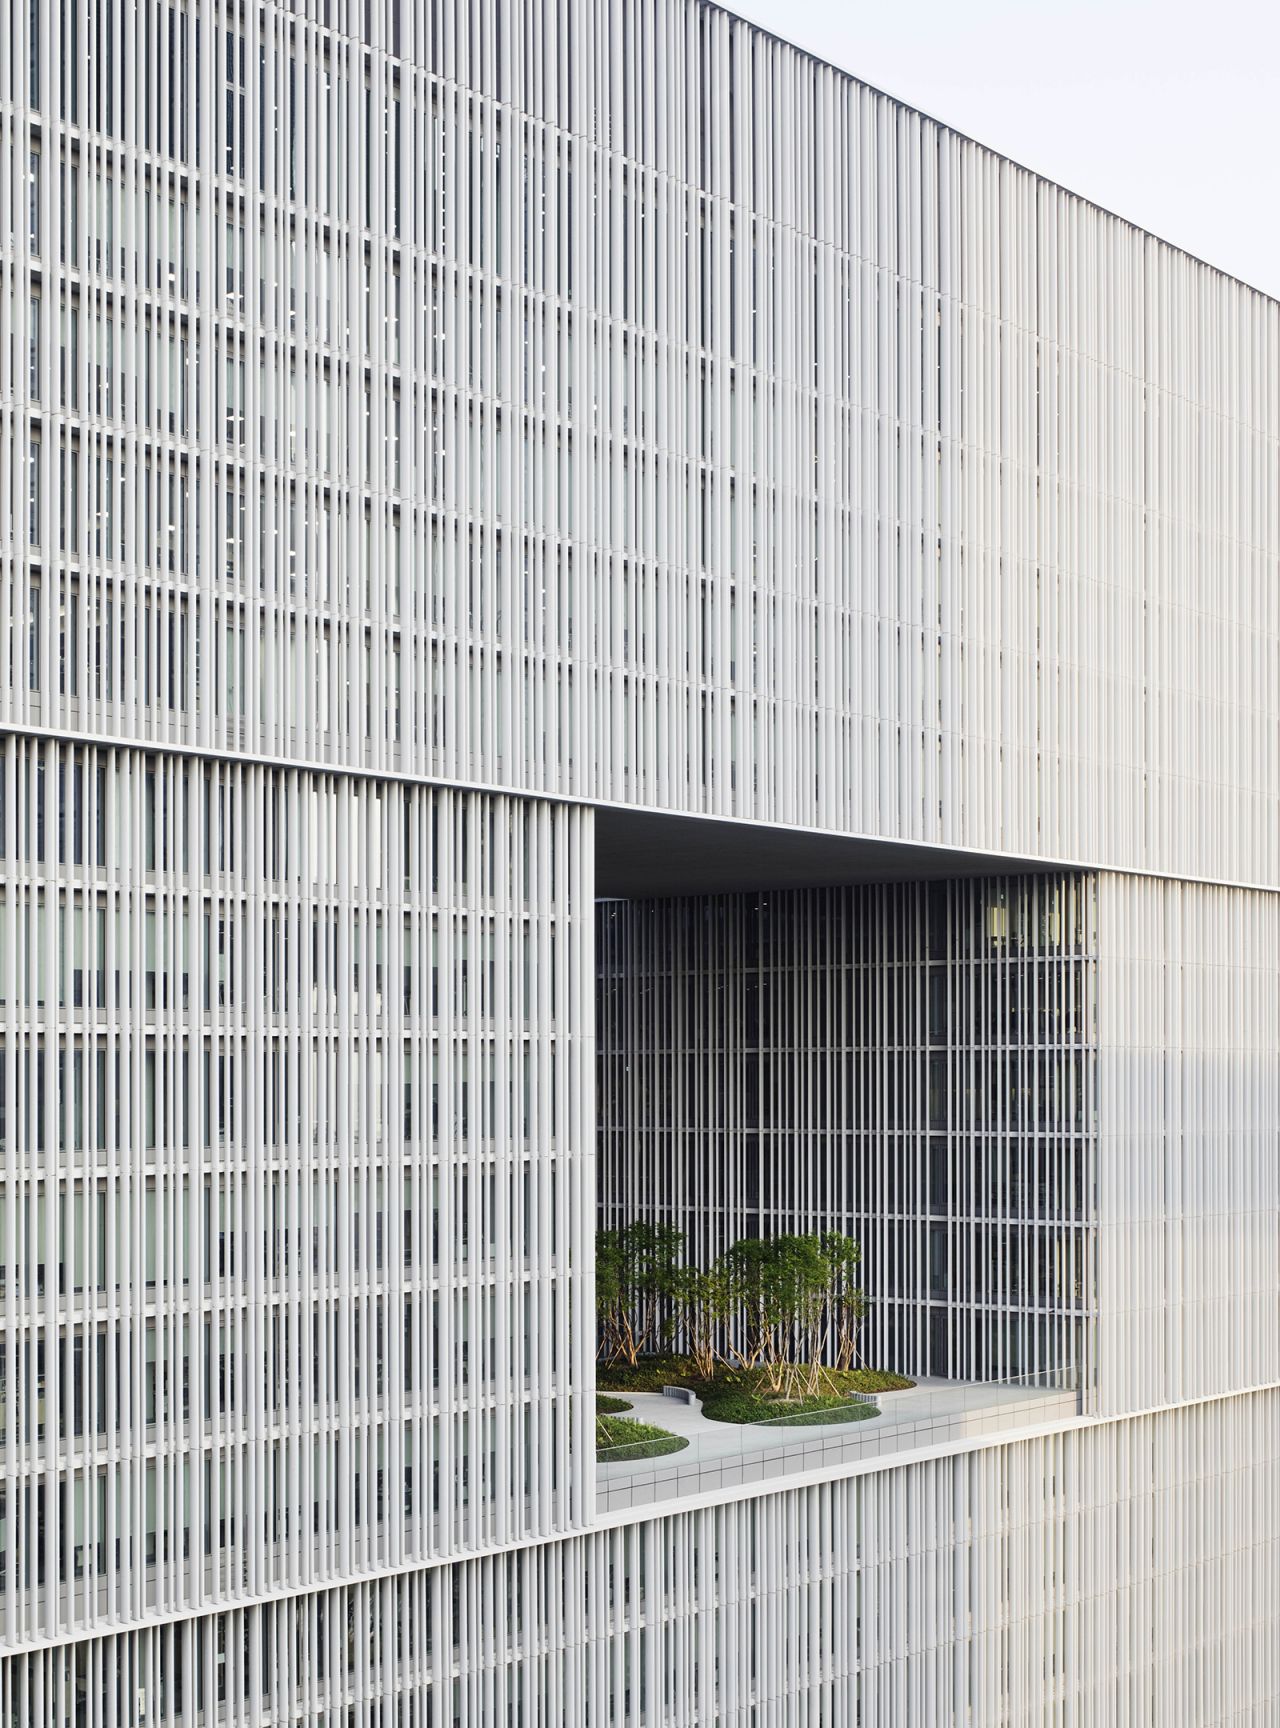 Vertical aluminum fins pass across the glass facade of the David Chipperfield-designed headquarters for beauty firm Amorepacific, in Seoul, South Korea.